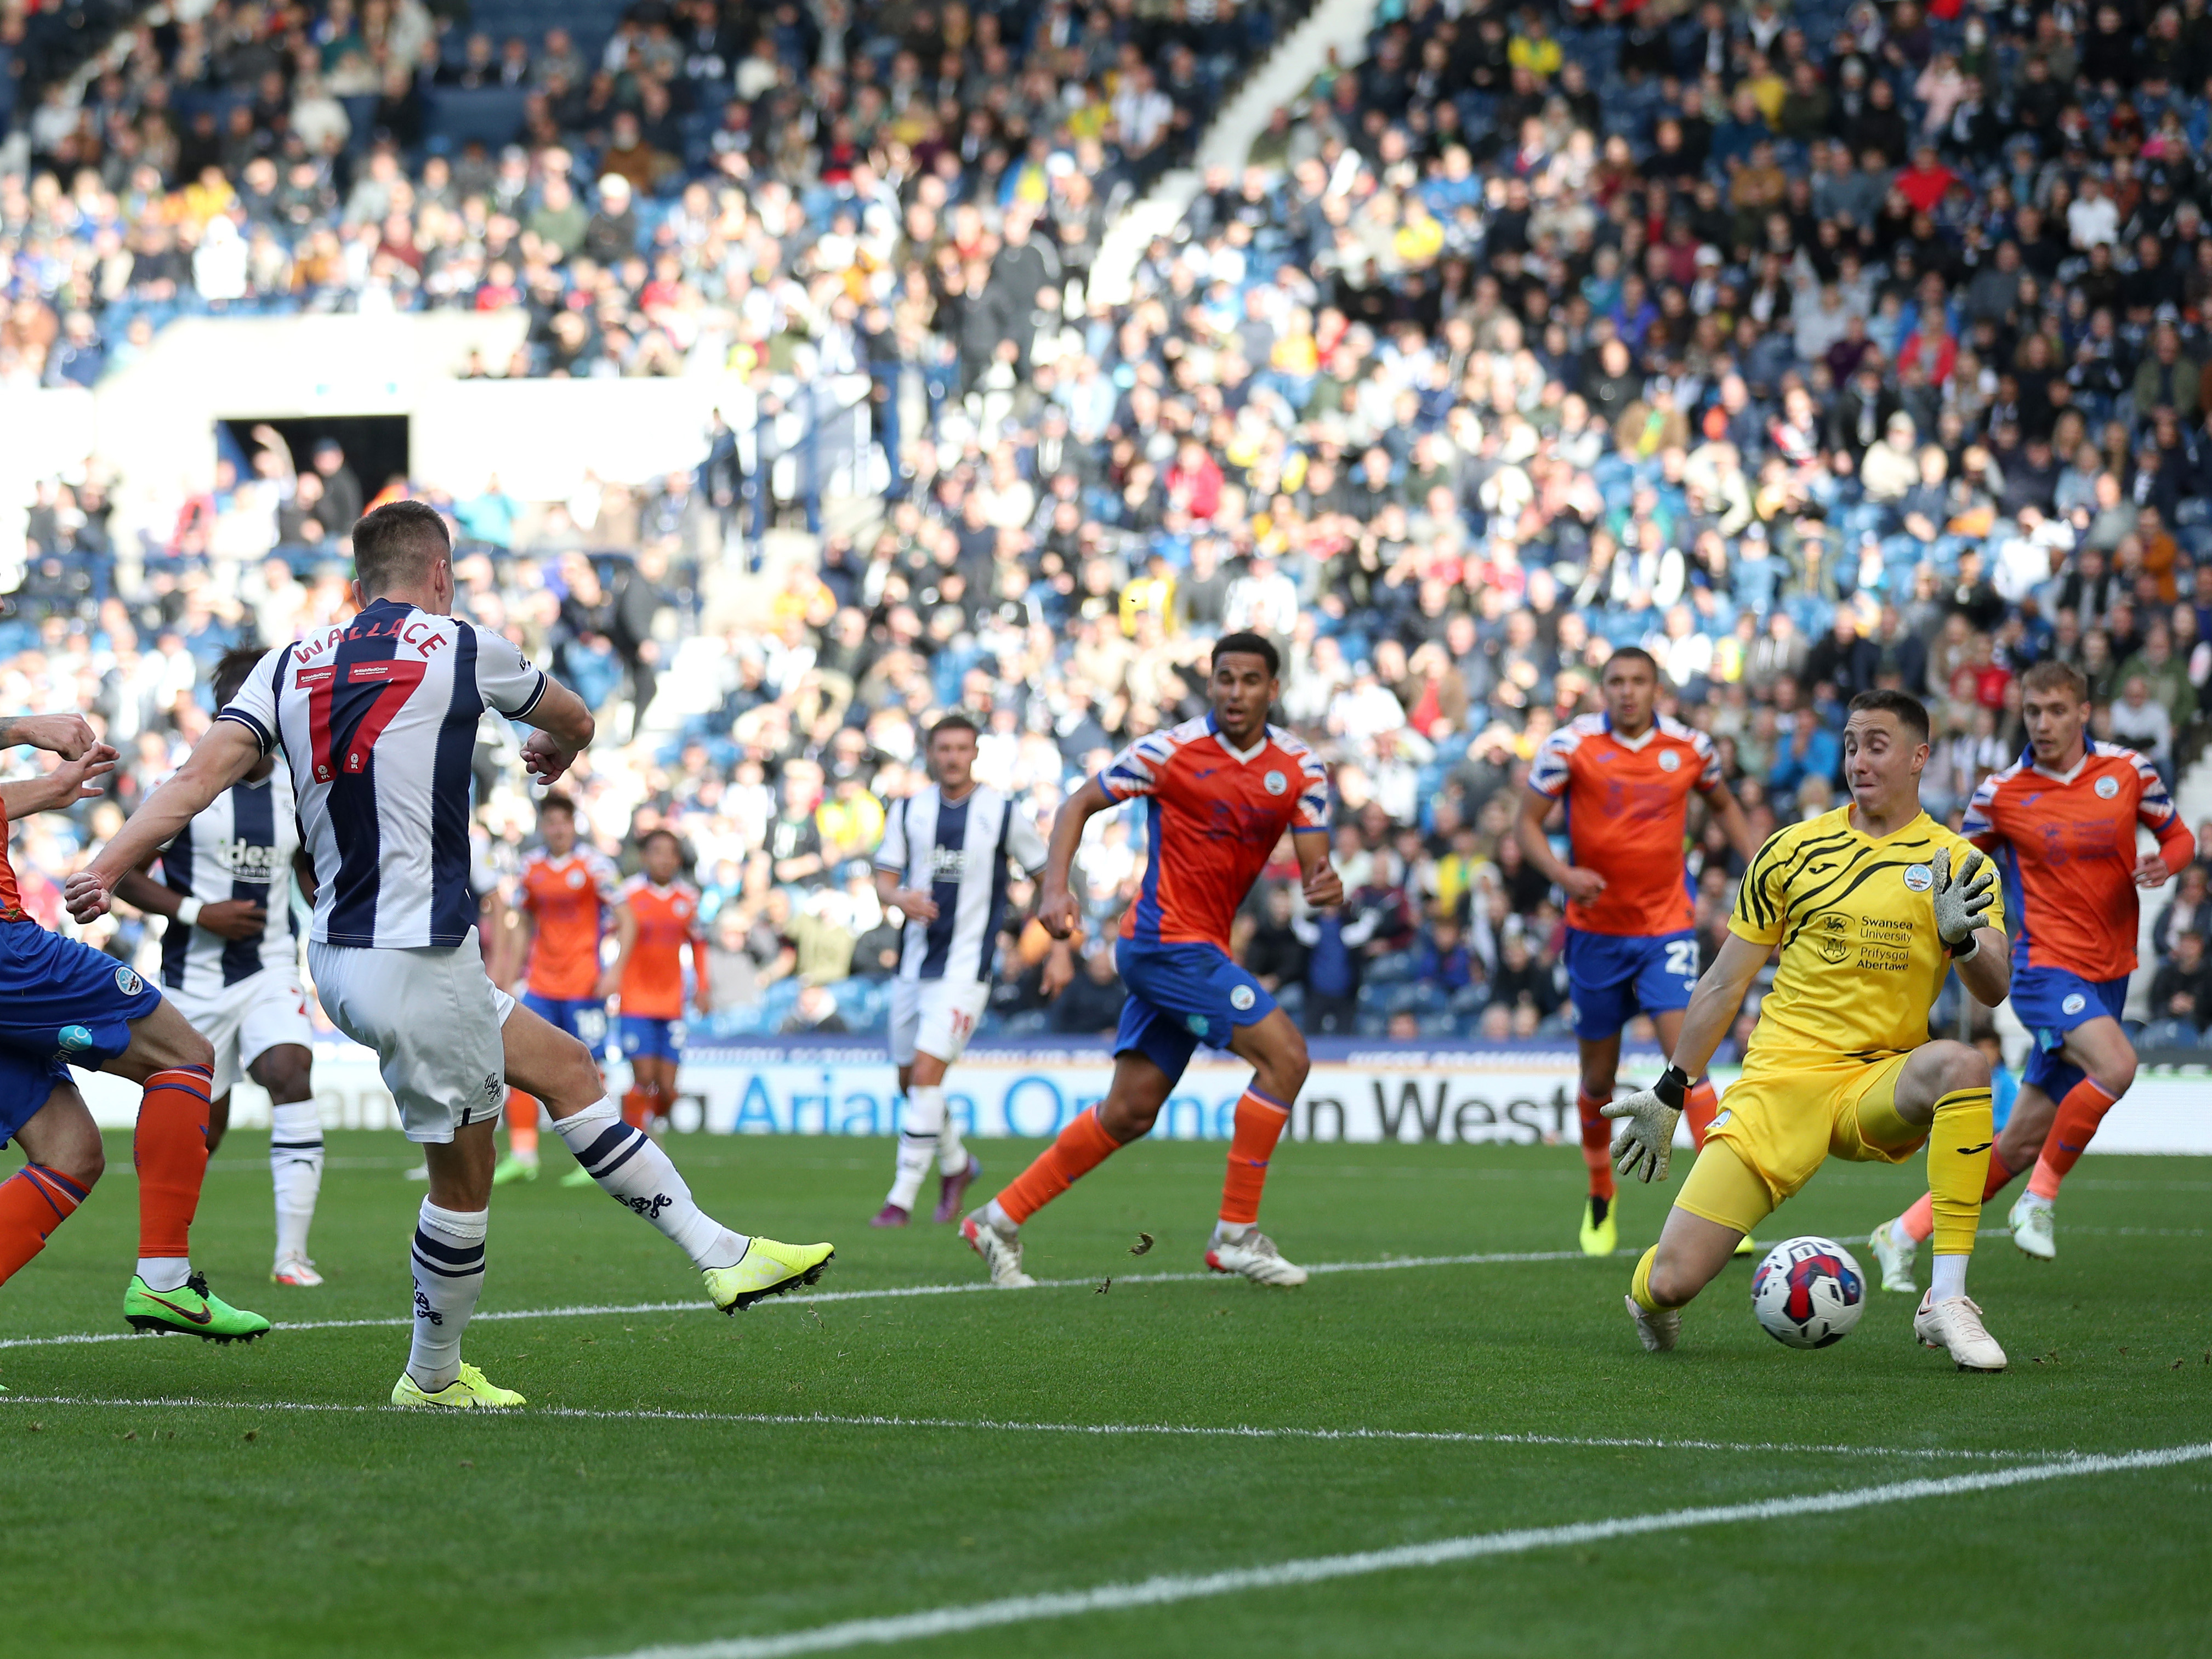 Jed Wallace has a shot saved against Swansea City